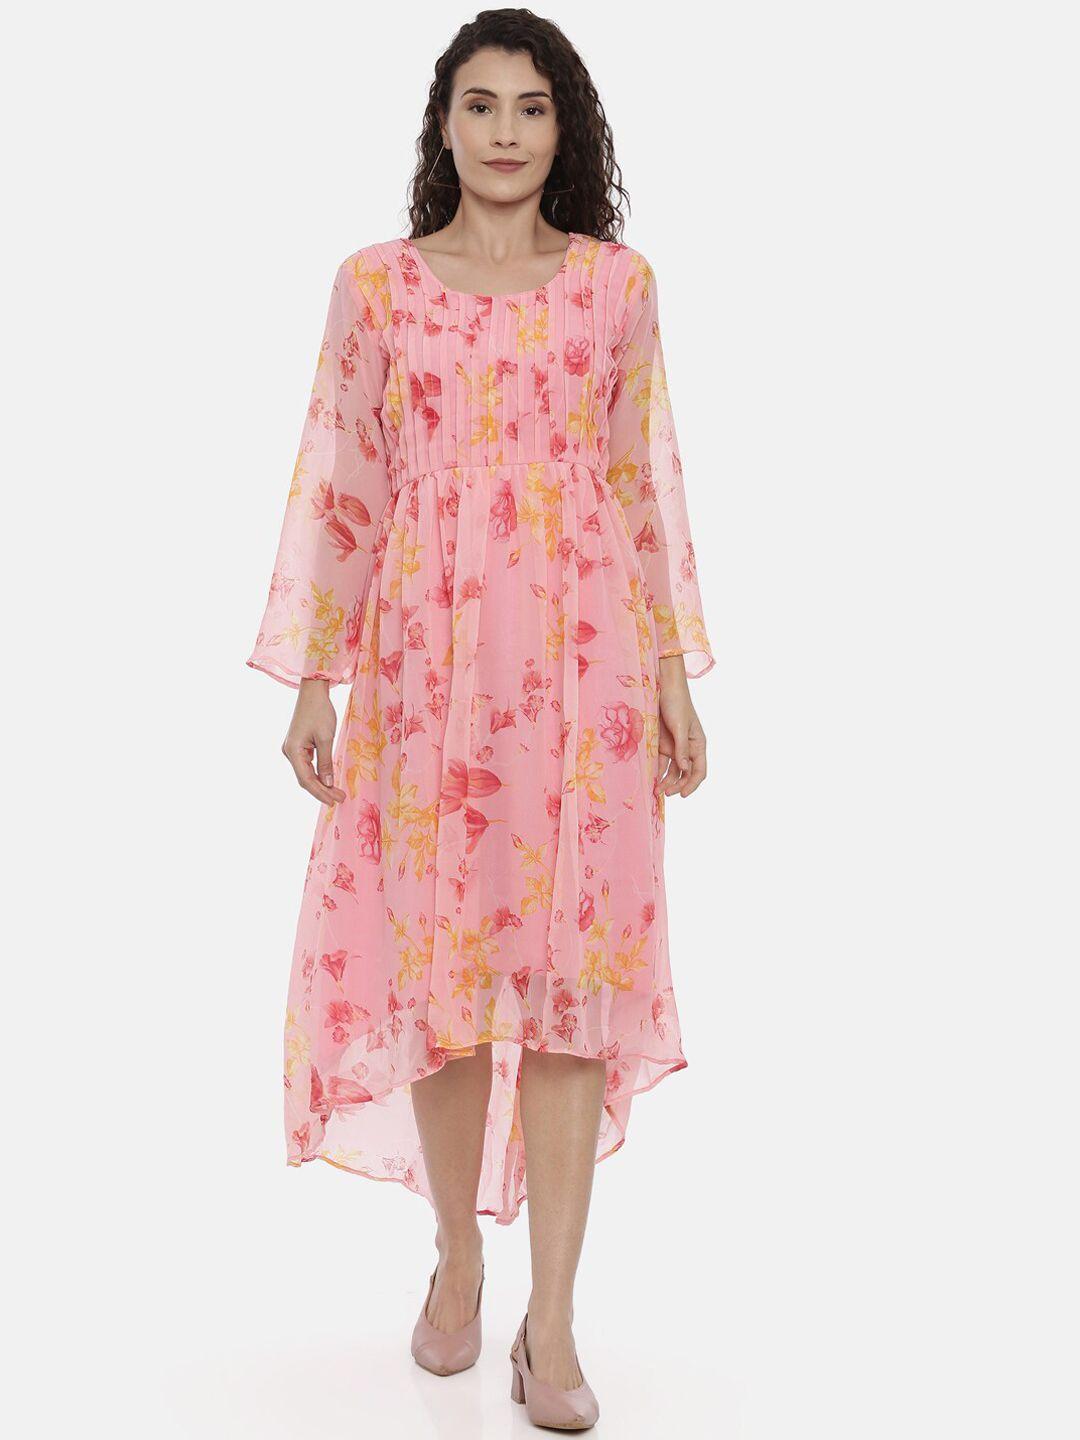 souchii-women-pink-floral-printed-a-line-dress